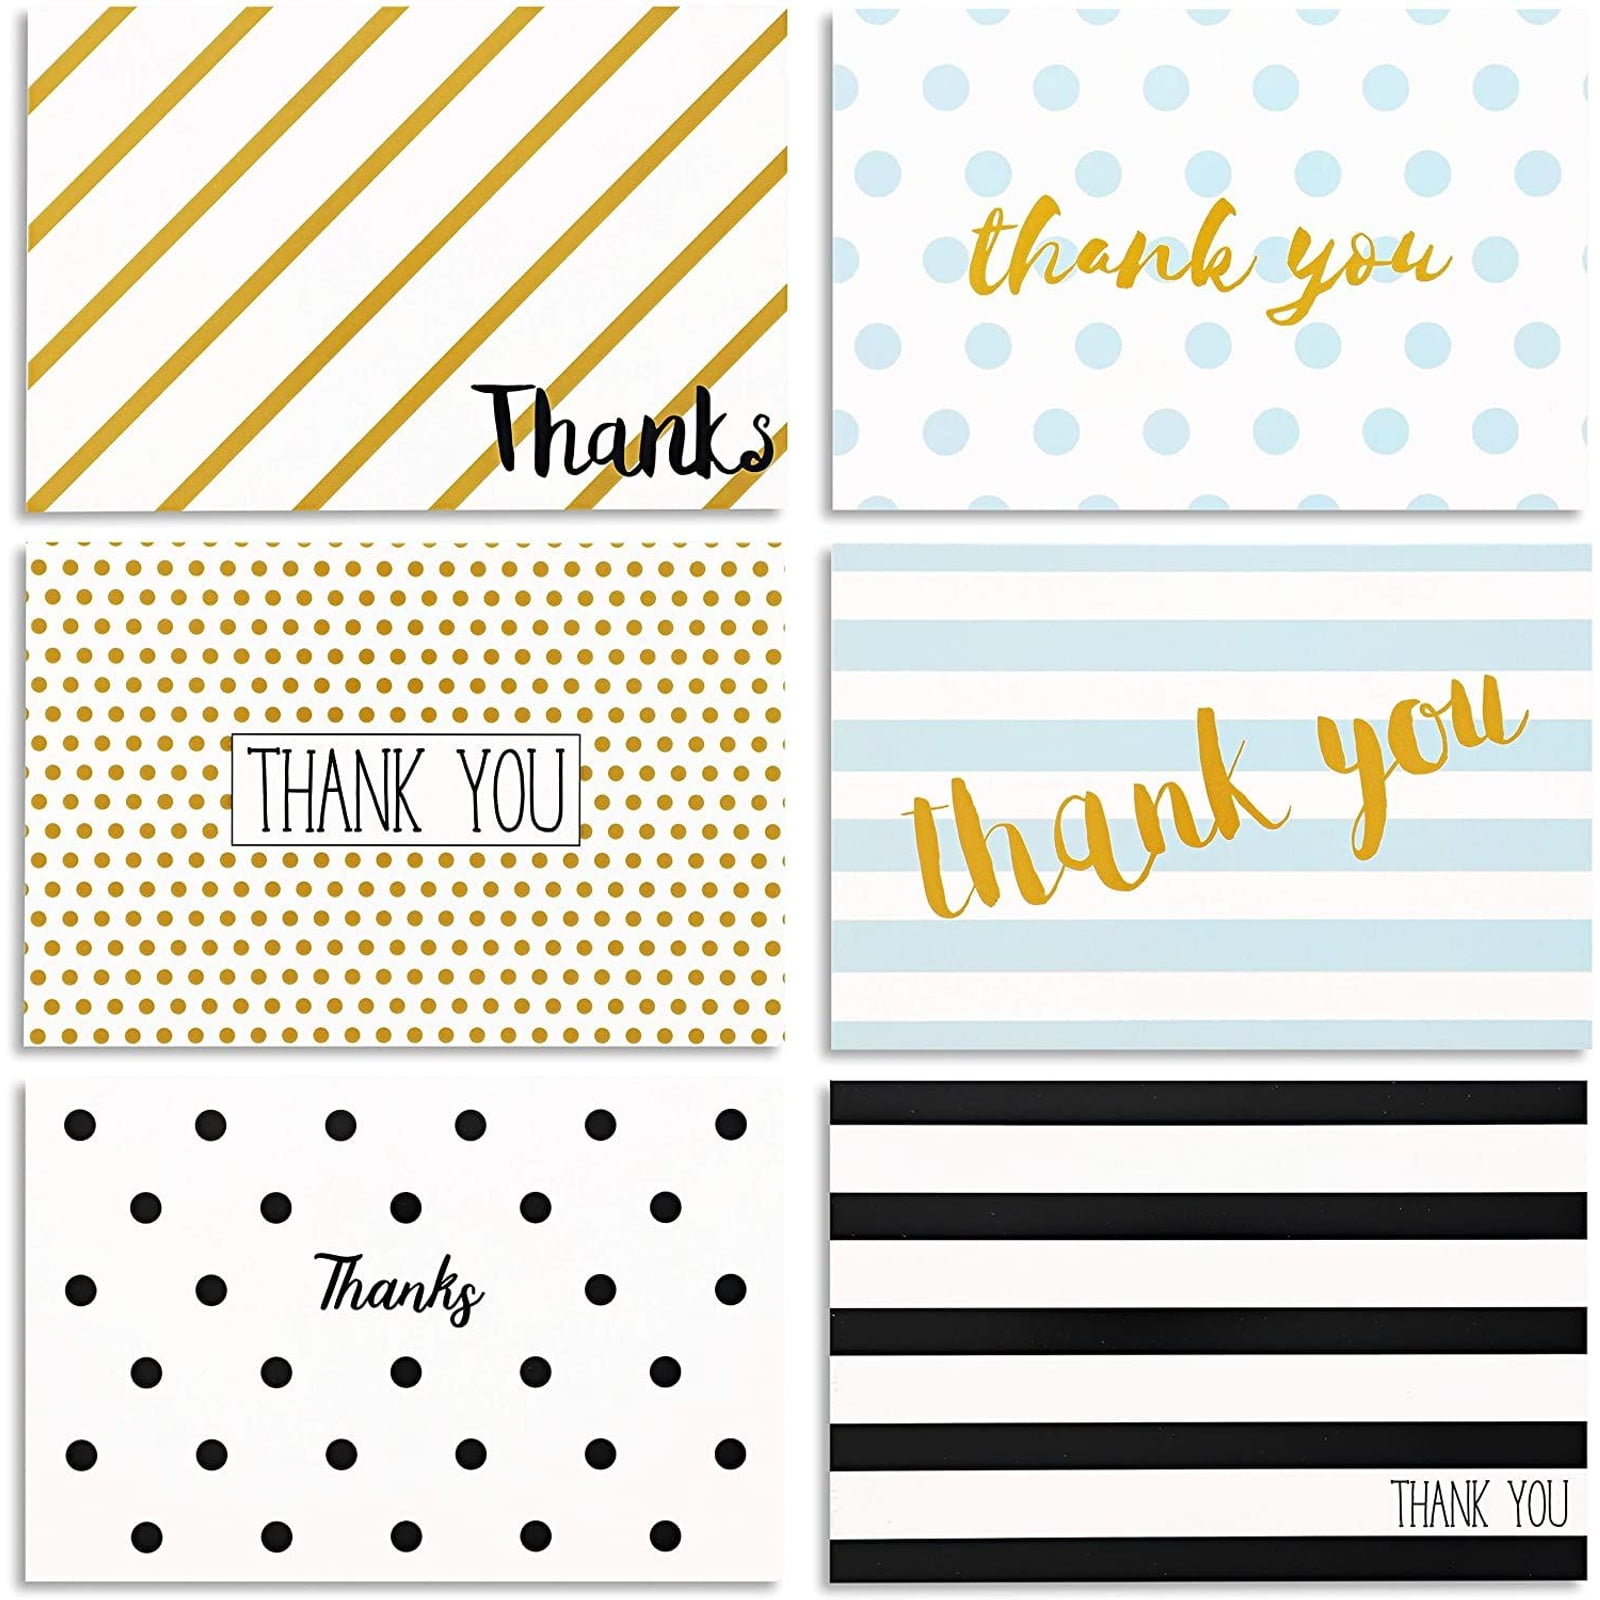 Decal Sticker Multiple Sizes Thank You for Taking The Time to Work Safely Industrial & Craft Thank You for Taking The Time to Work Store Sign White 